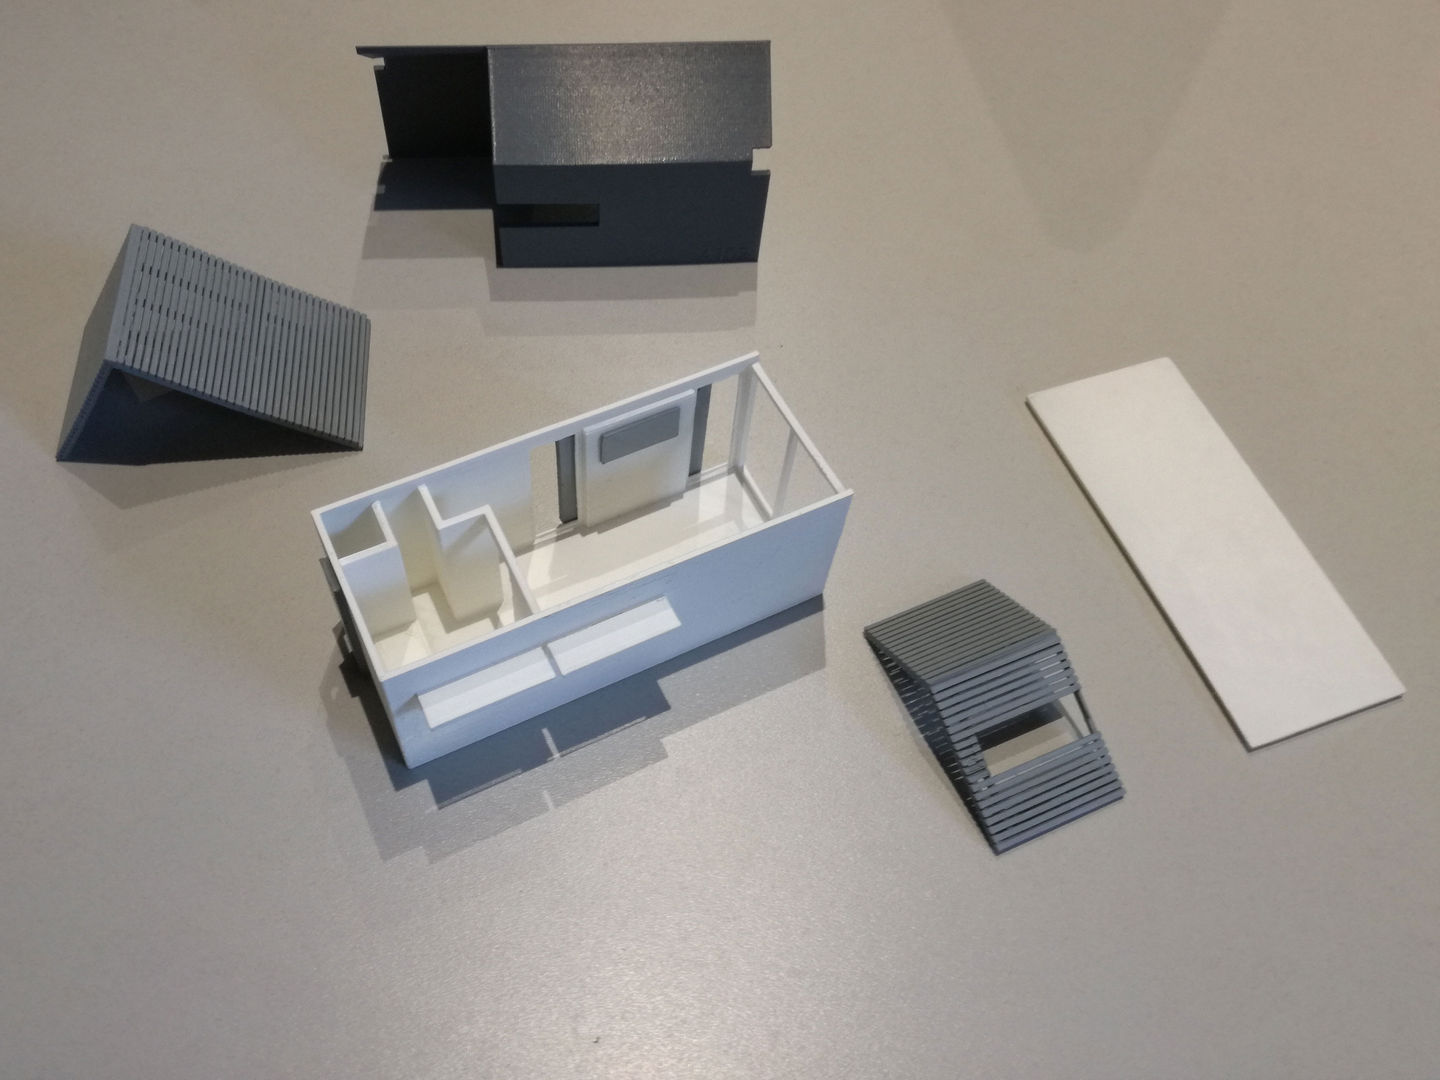 IMPALA 3D PRINTED PARTS A4AC Architects